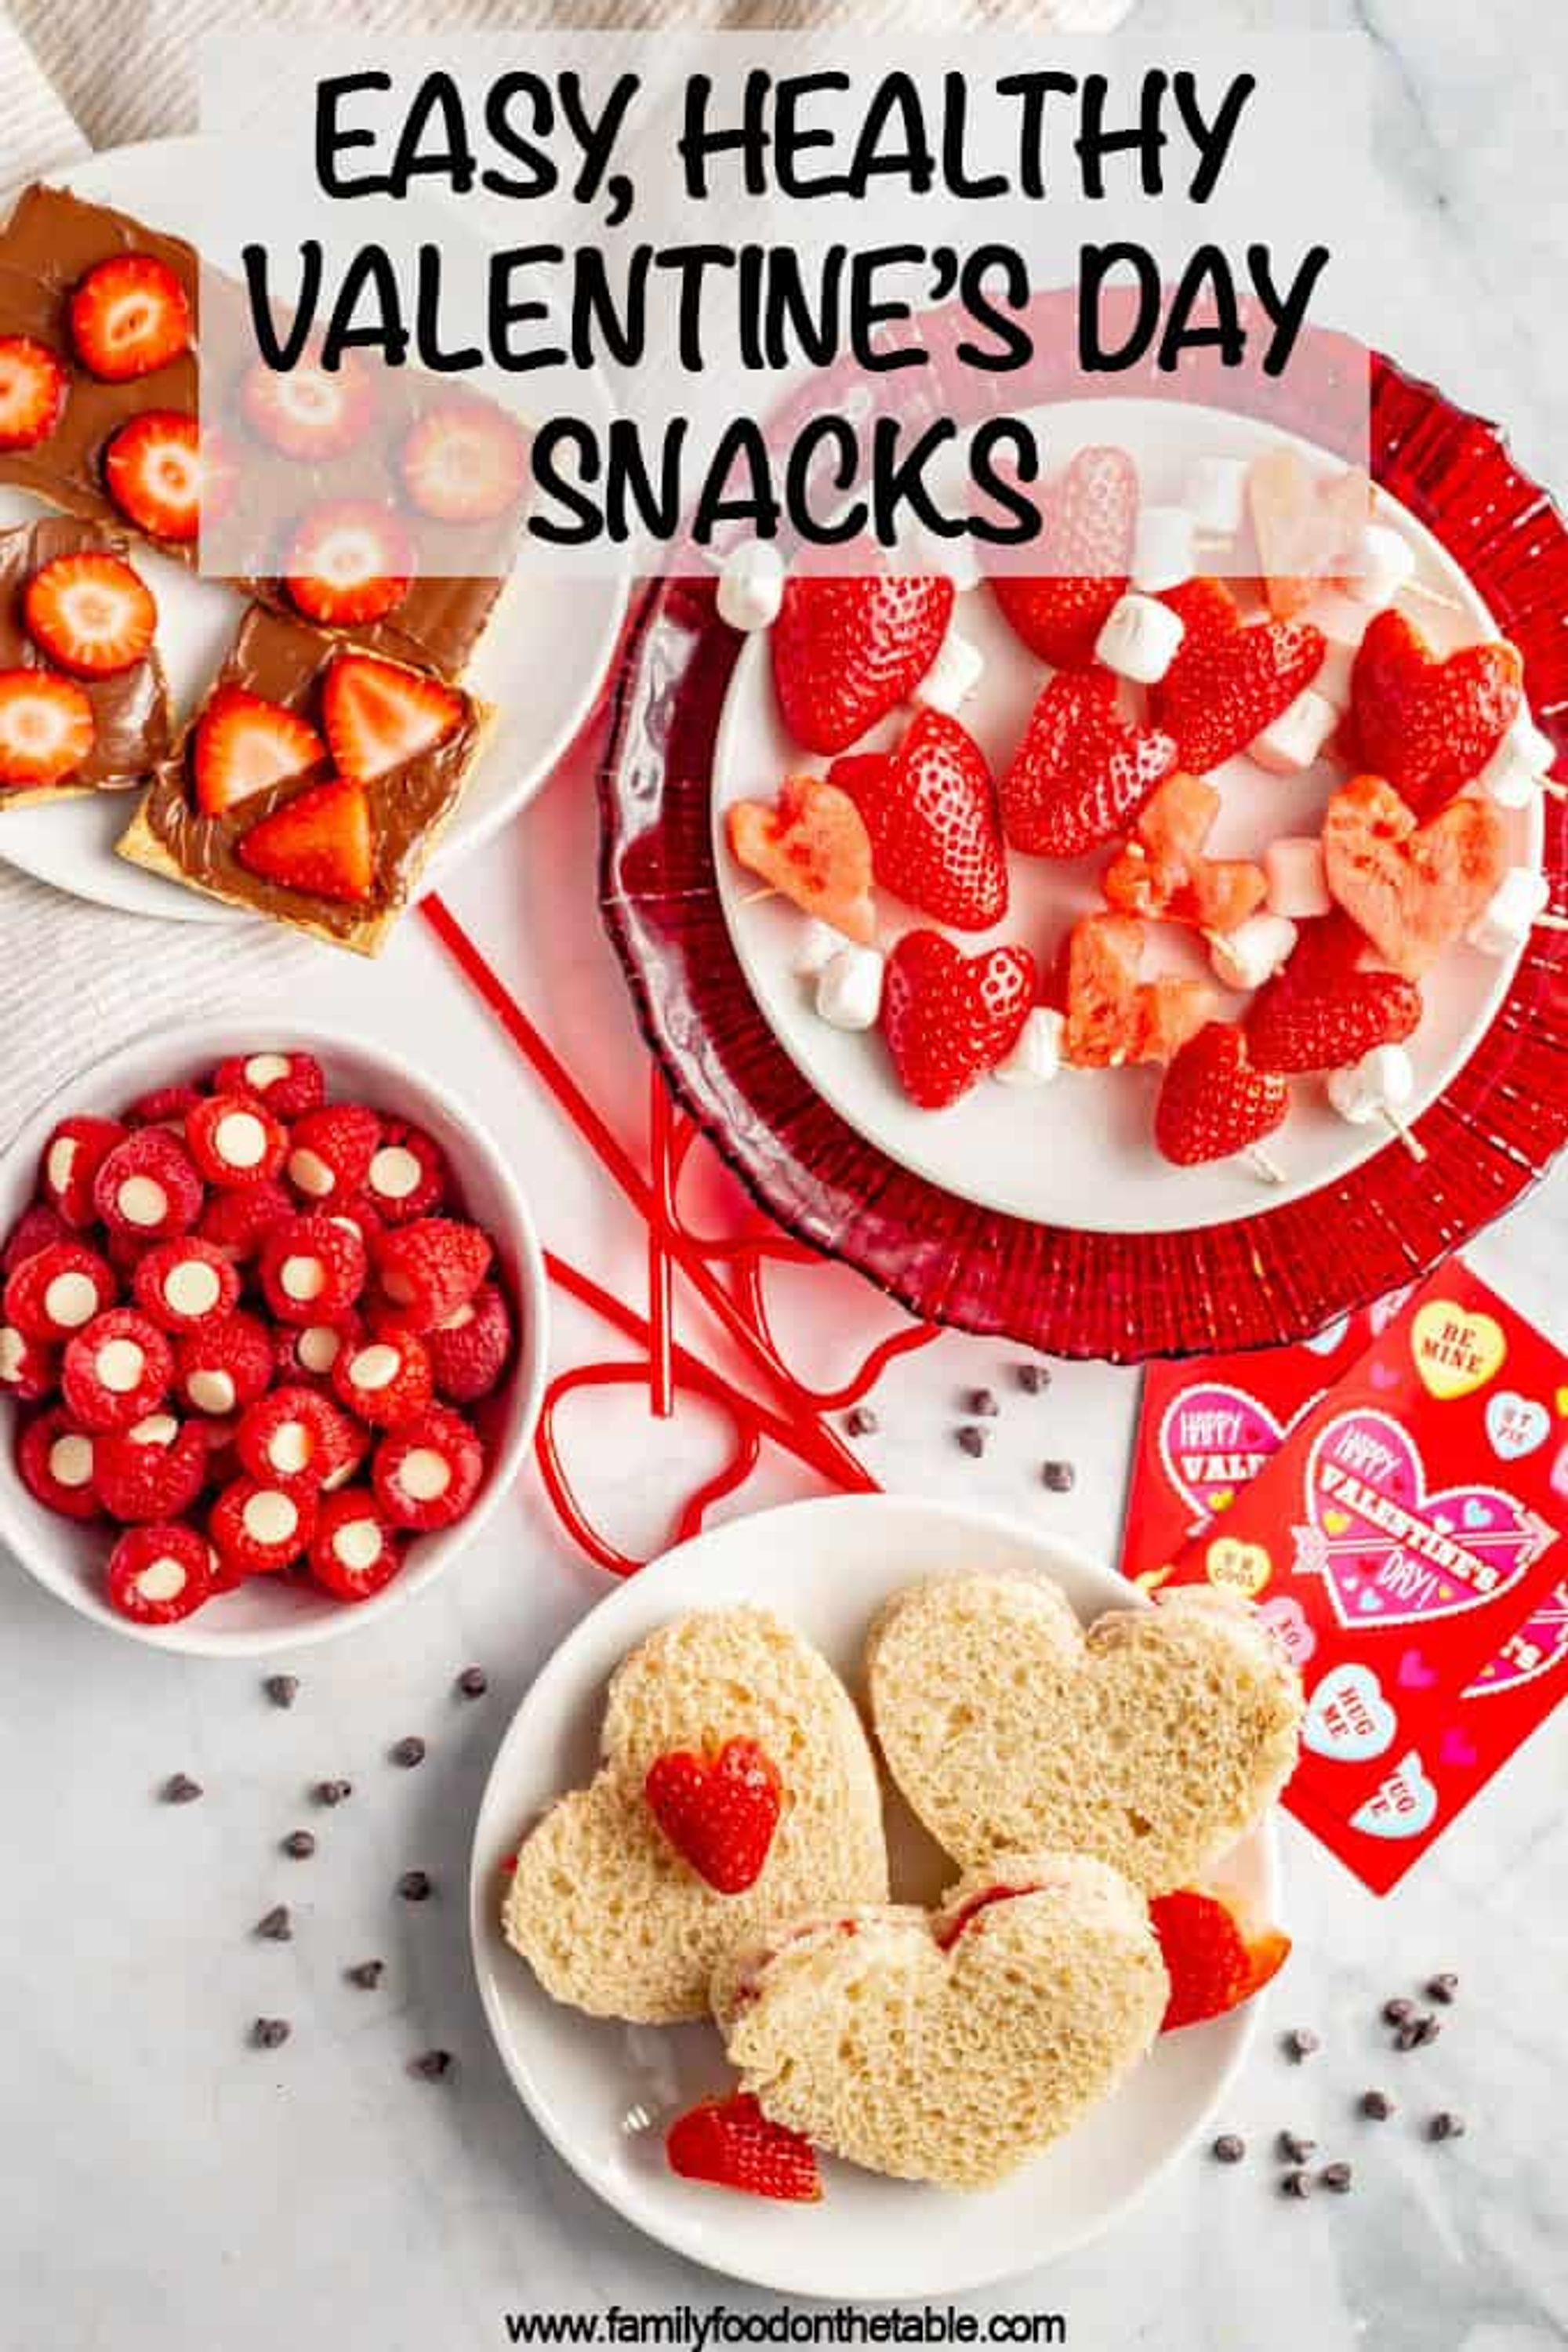 Healthy Valentine's Day Snacks - 33 ideas - Family Food on the Table ...